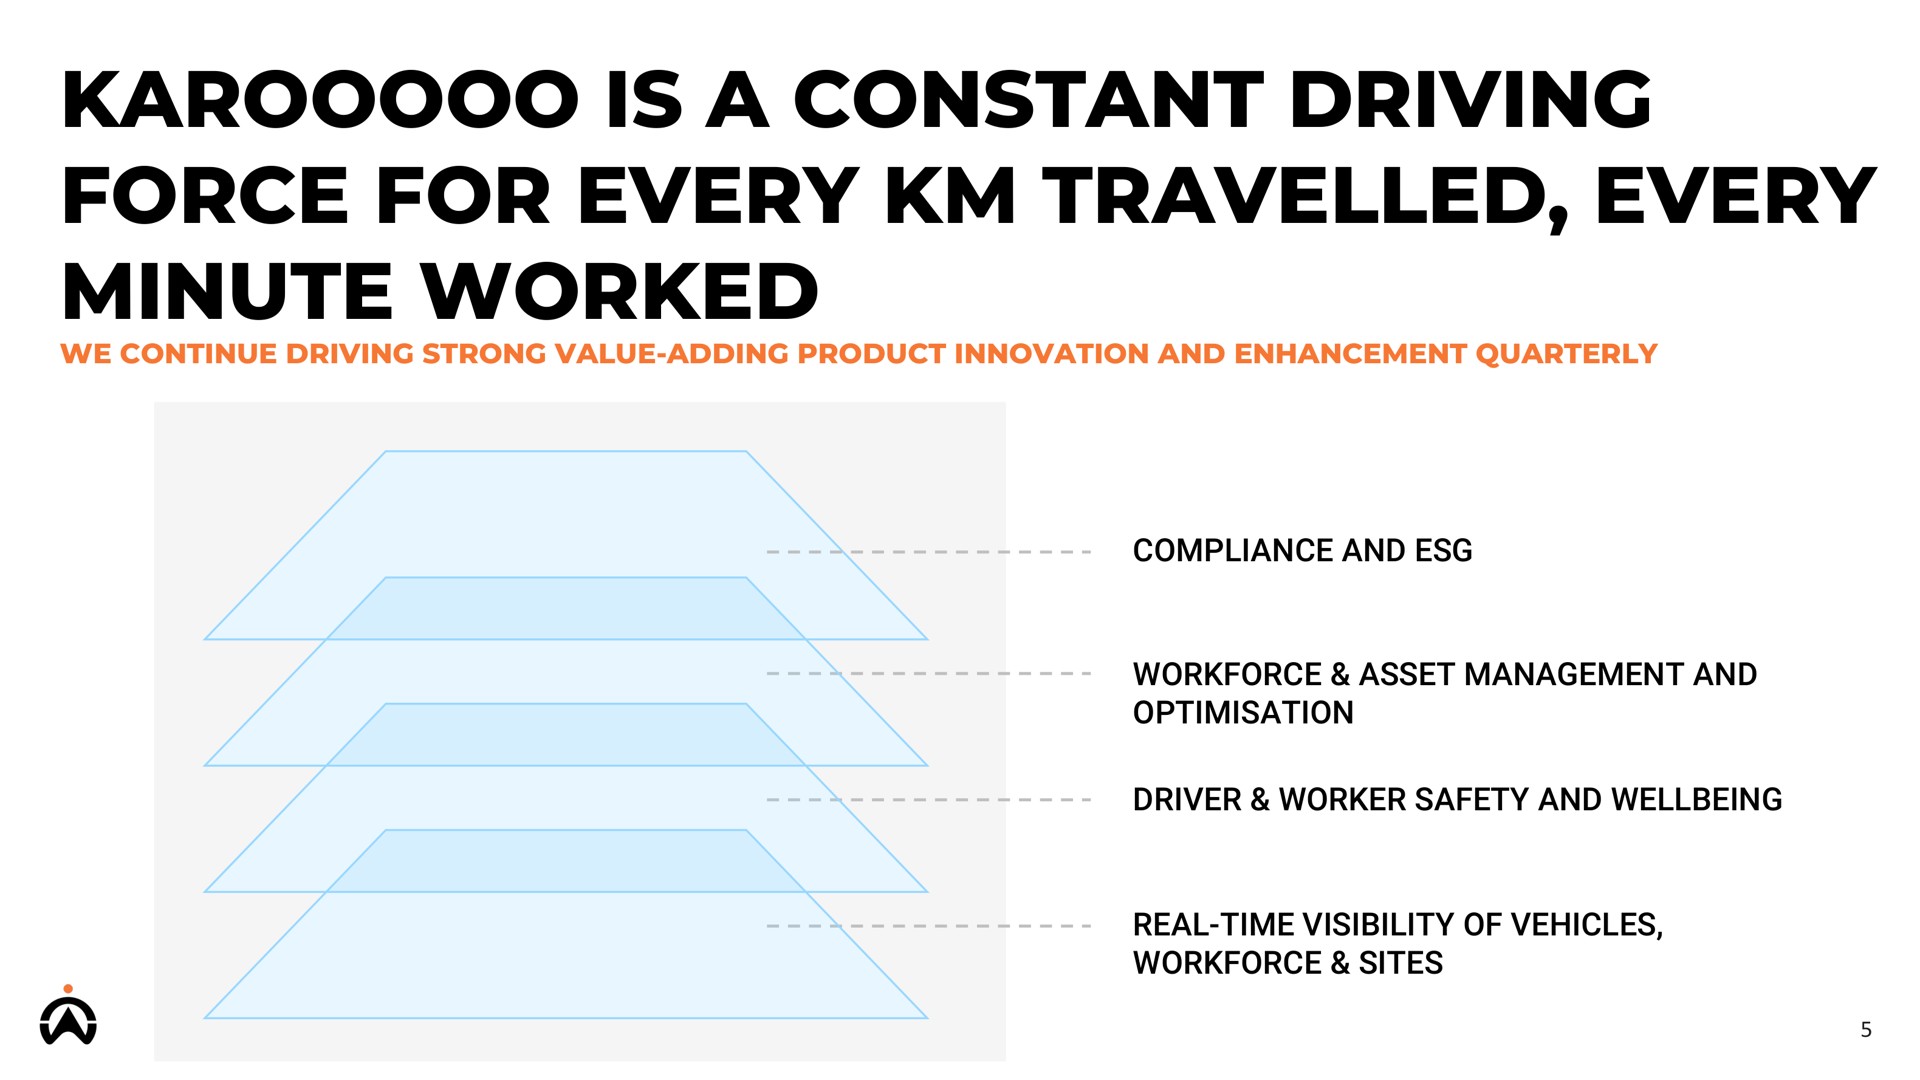 is a constant driving force for every travelled every minute worked | Karooooo